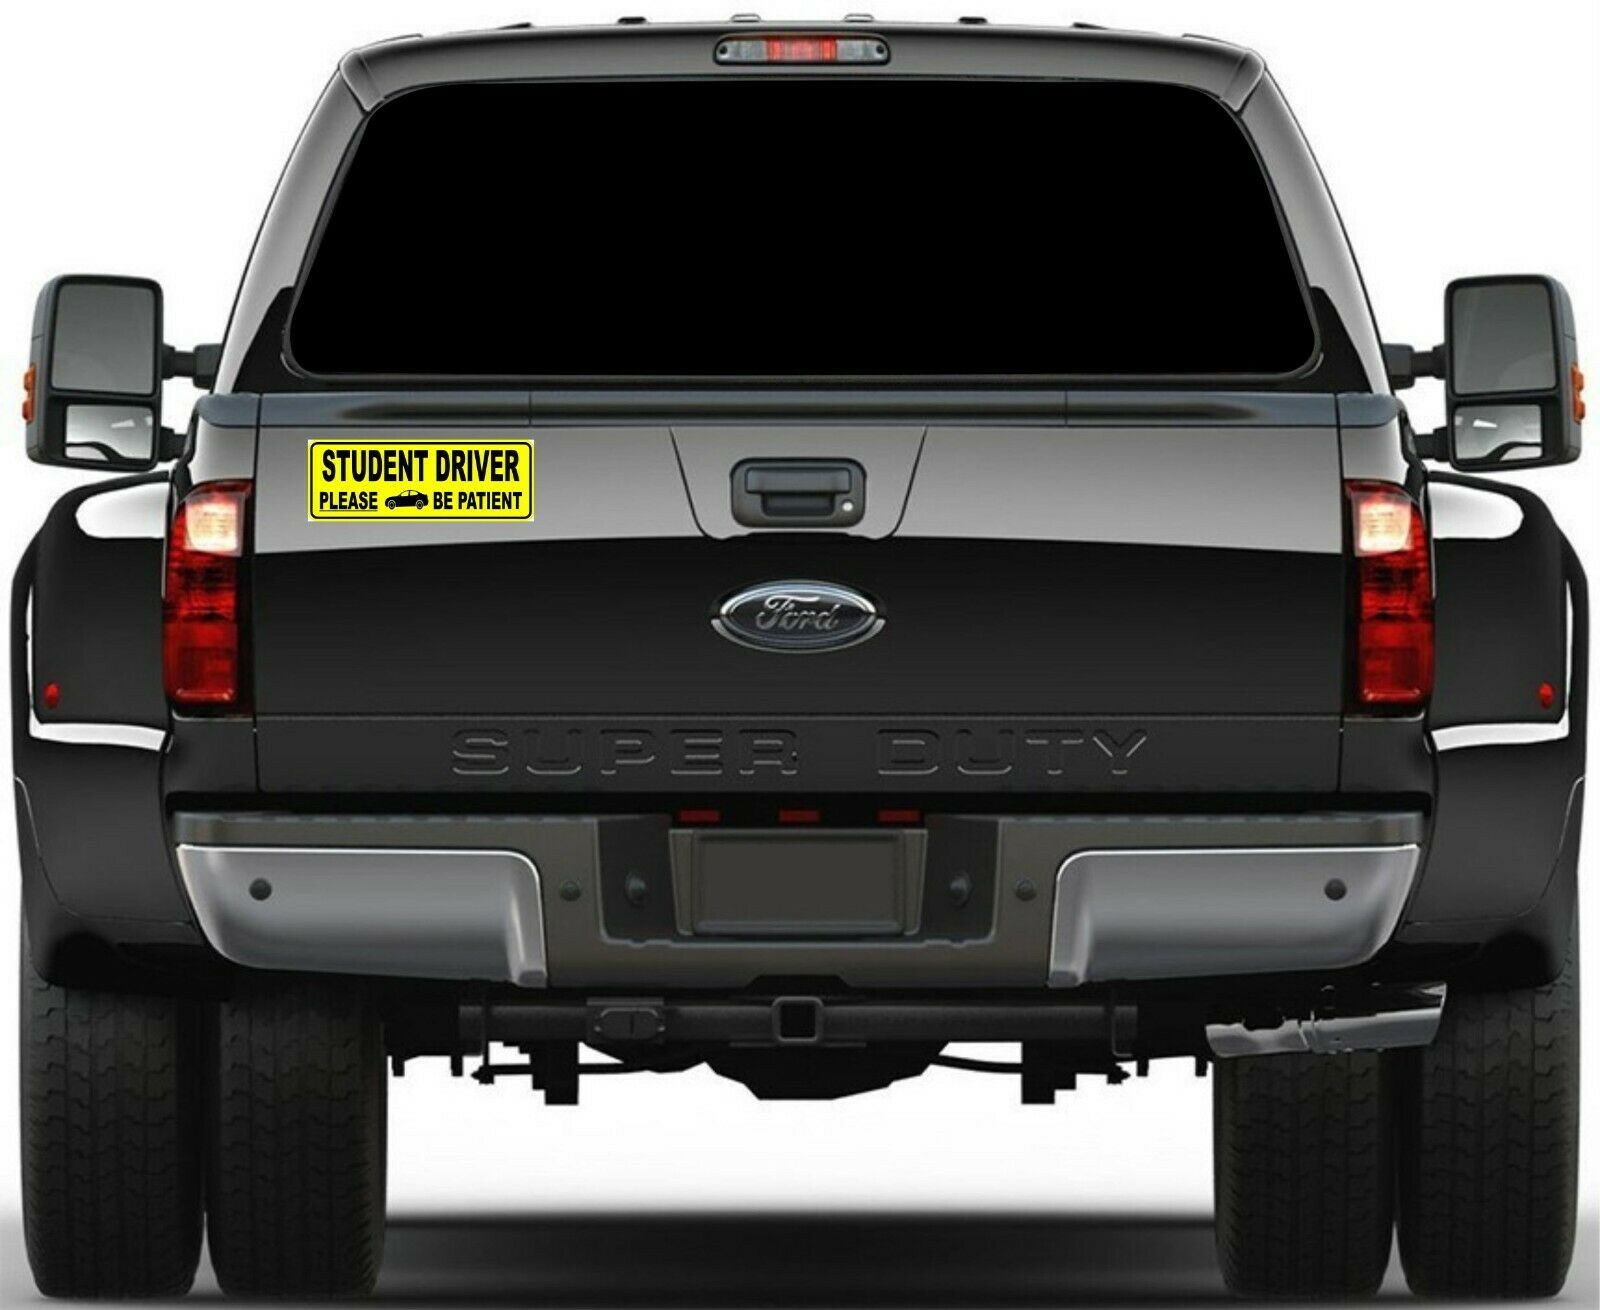 Student Driver Please Be Patient Car Bumper STICKER Decal 8.7" x 3" Buy 3 1 Free - Powercall Sirens LLC